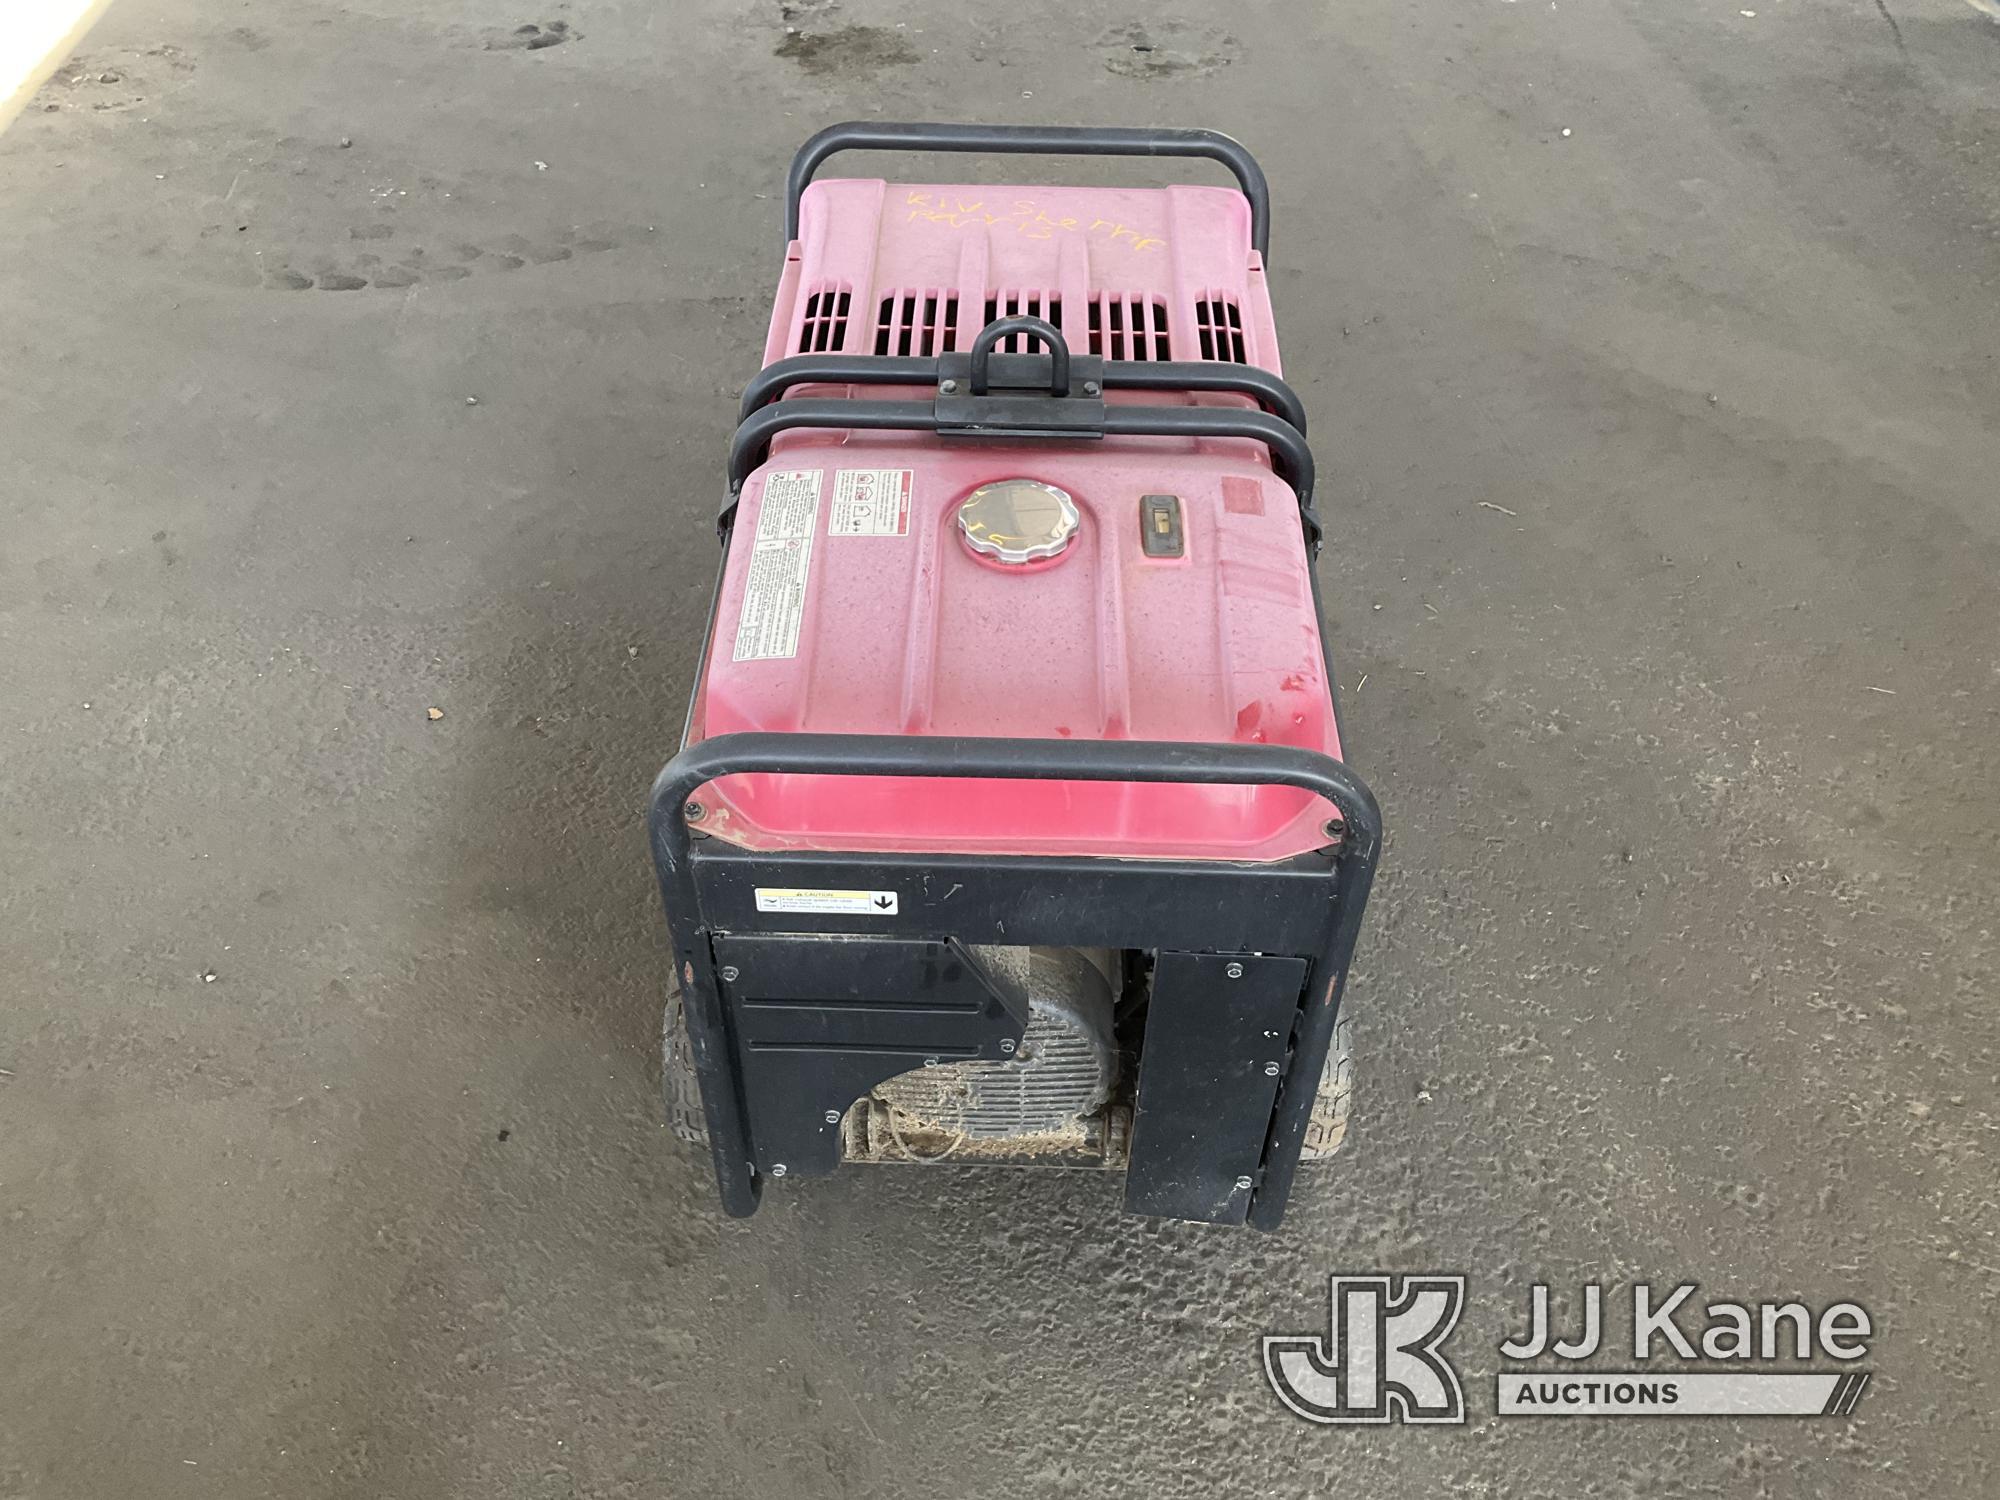 (Jurupa Valley, CA) Honda EB10000 Generator (Used) NOTE: This unit is being sold AS IS/WHERE IS via